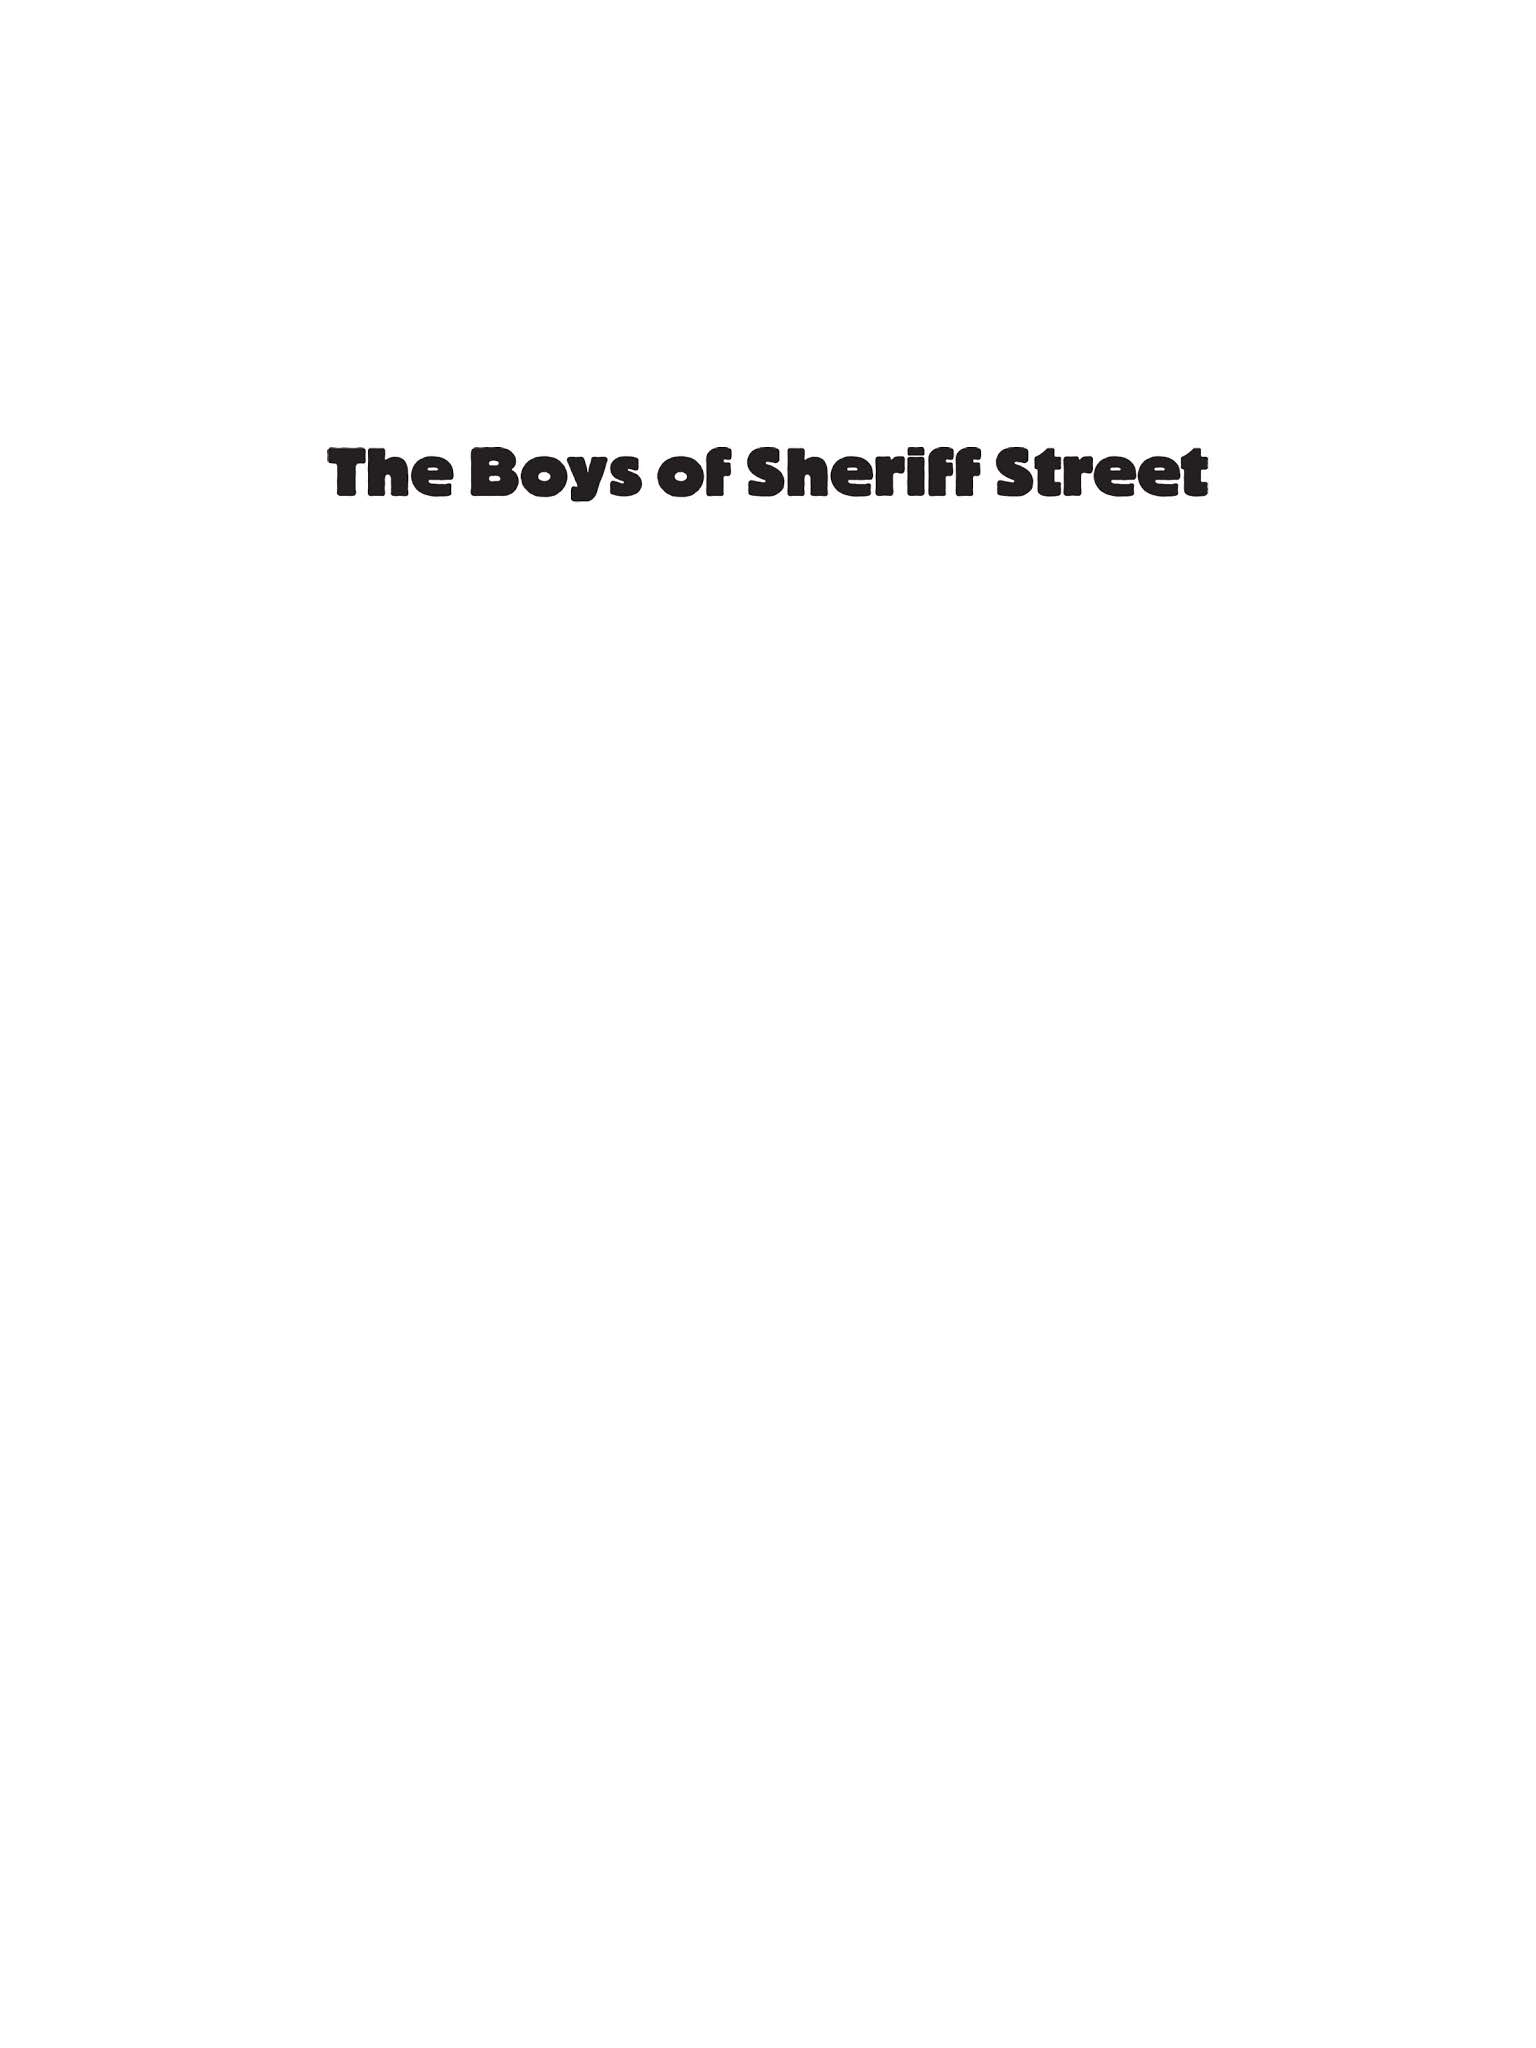 Read online The Boys of Sheriff Street comic -  Issue # TPB - 7